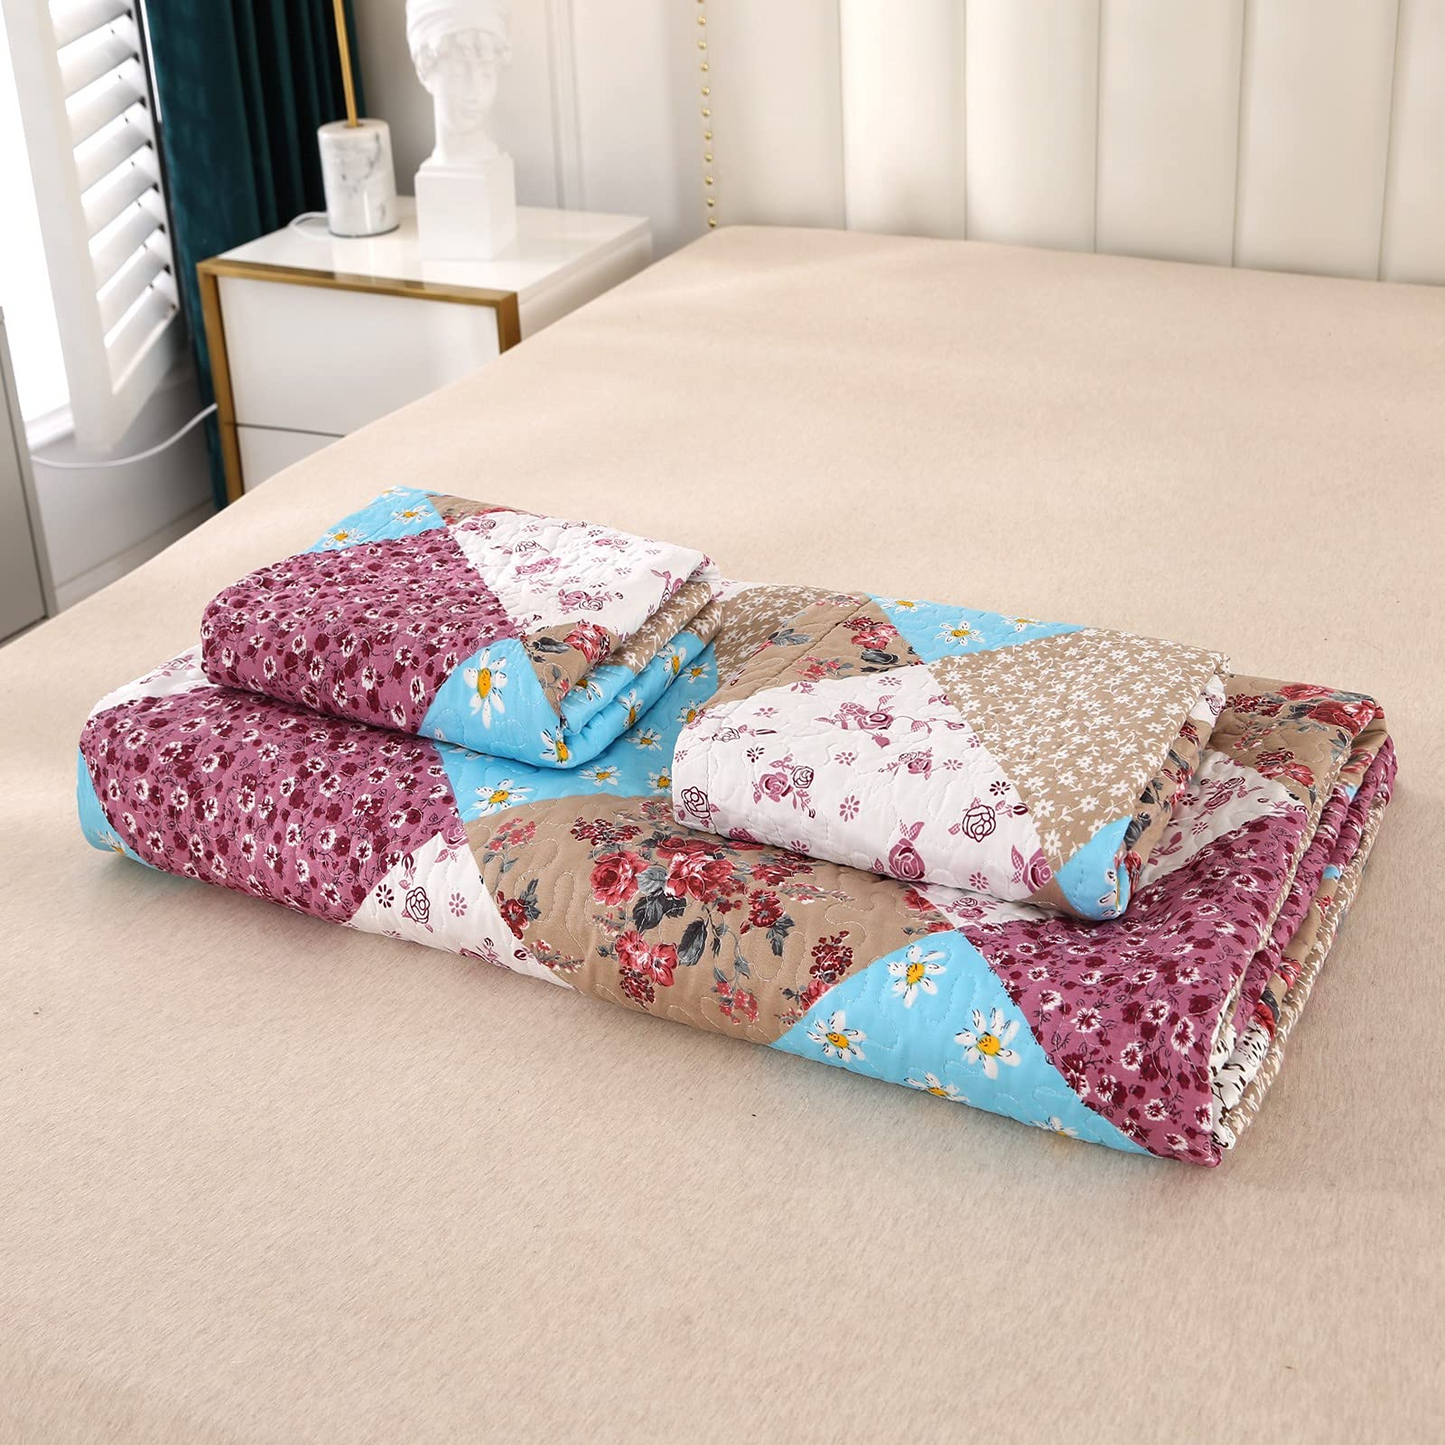 Bohemian Style Floral Patchwork Reversible 3 Pieces Quilt Set with 2 Pillowcases